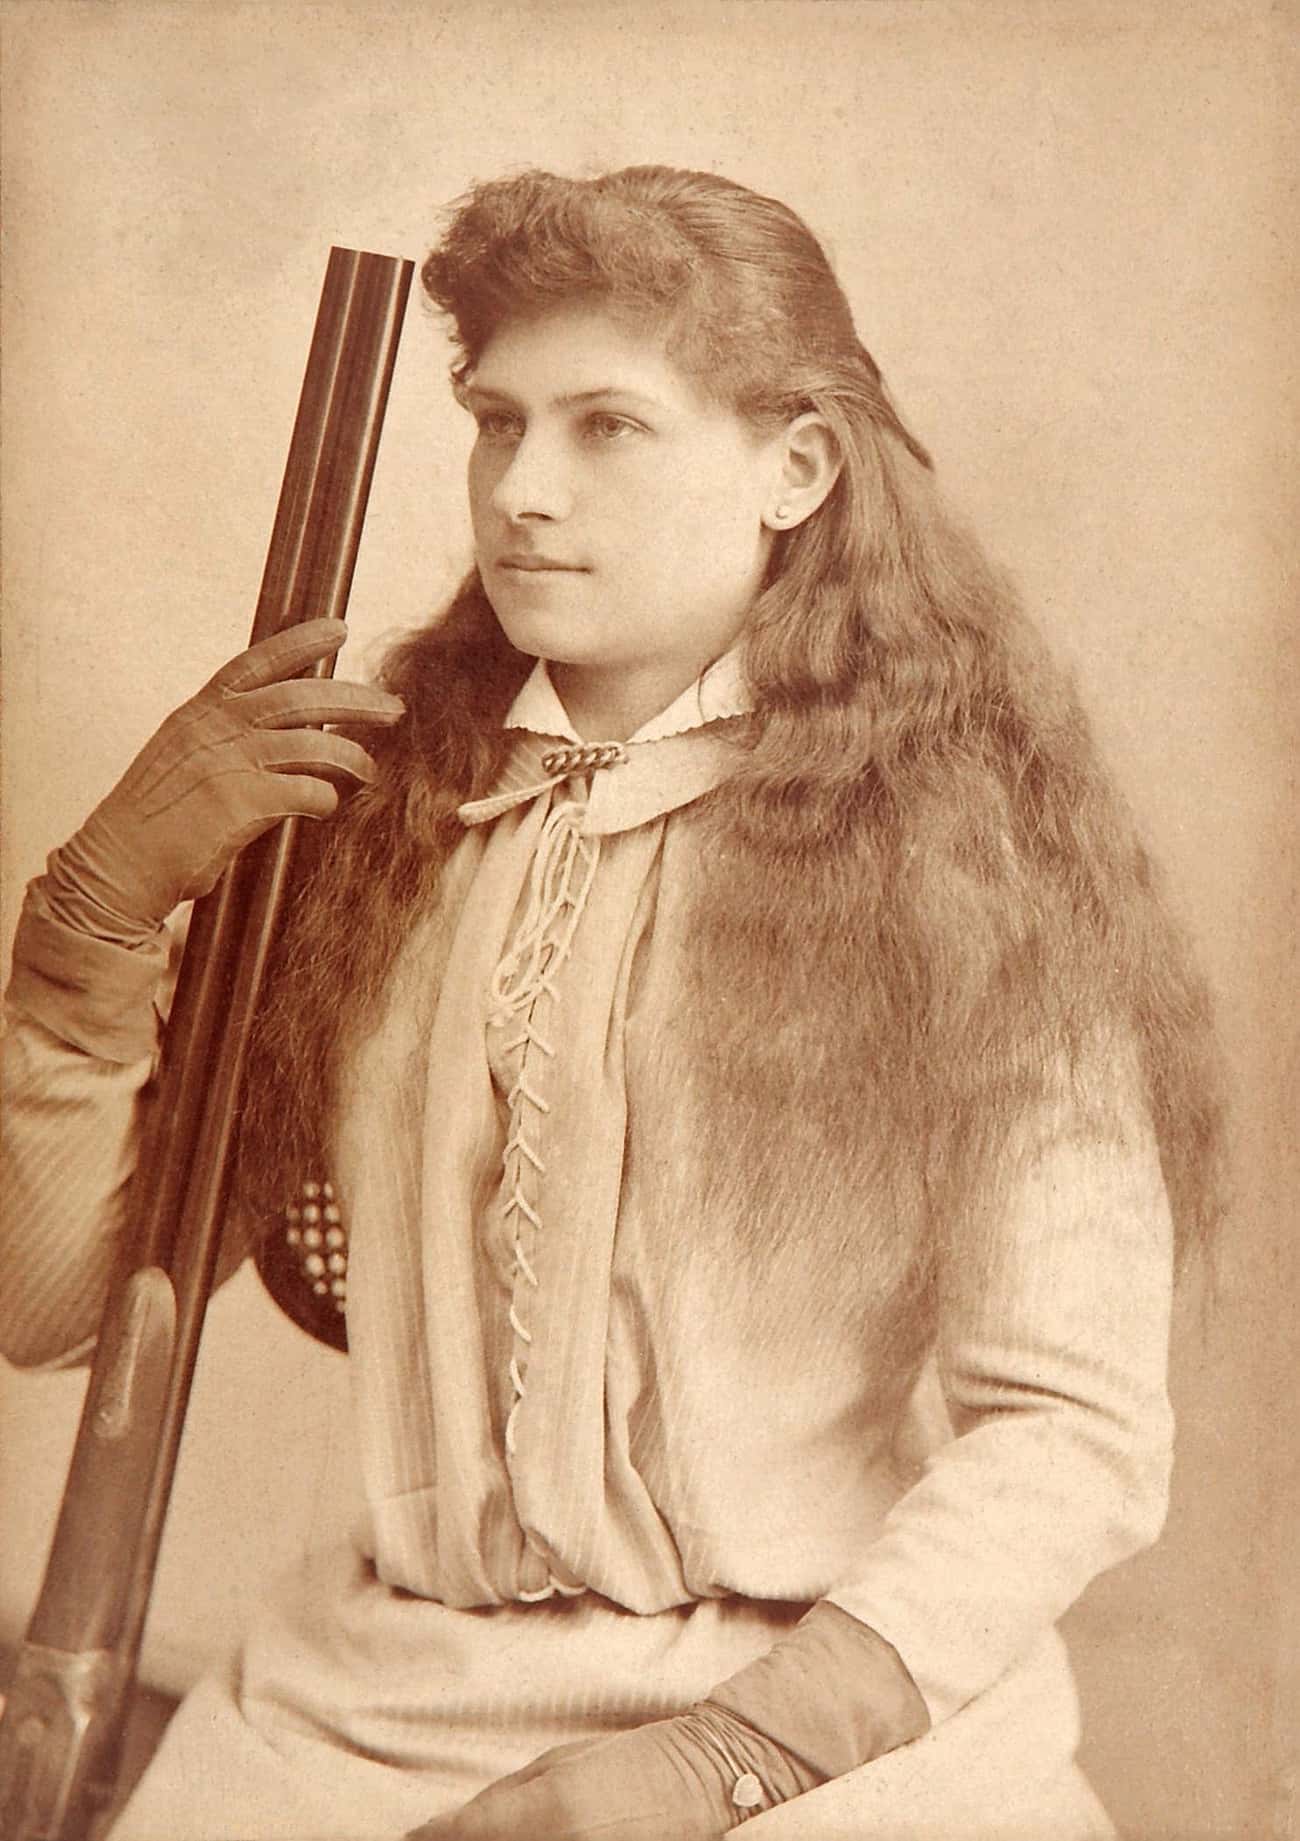 Chief Sitting Bull Sent $65 And A Messenger To Annie Oakley’s Hotel Room To Get Her Autograph